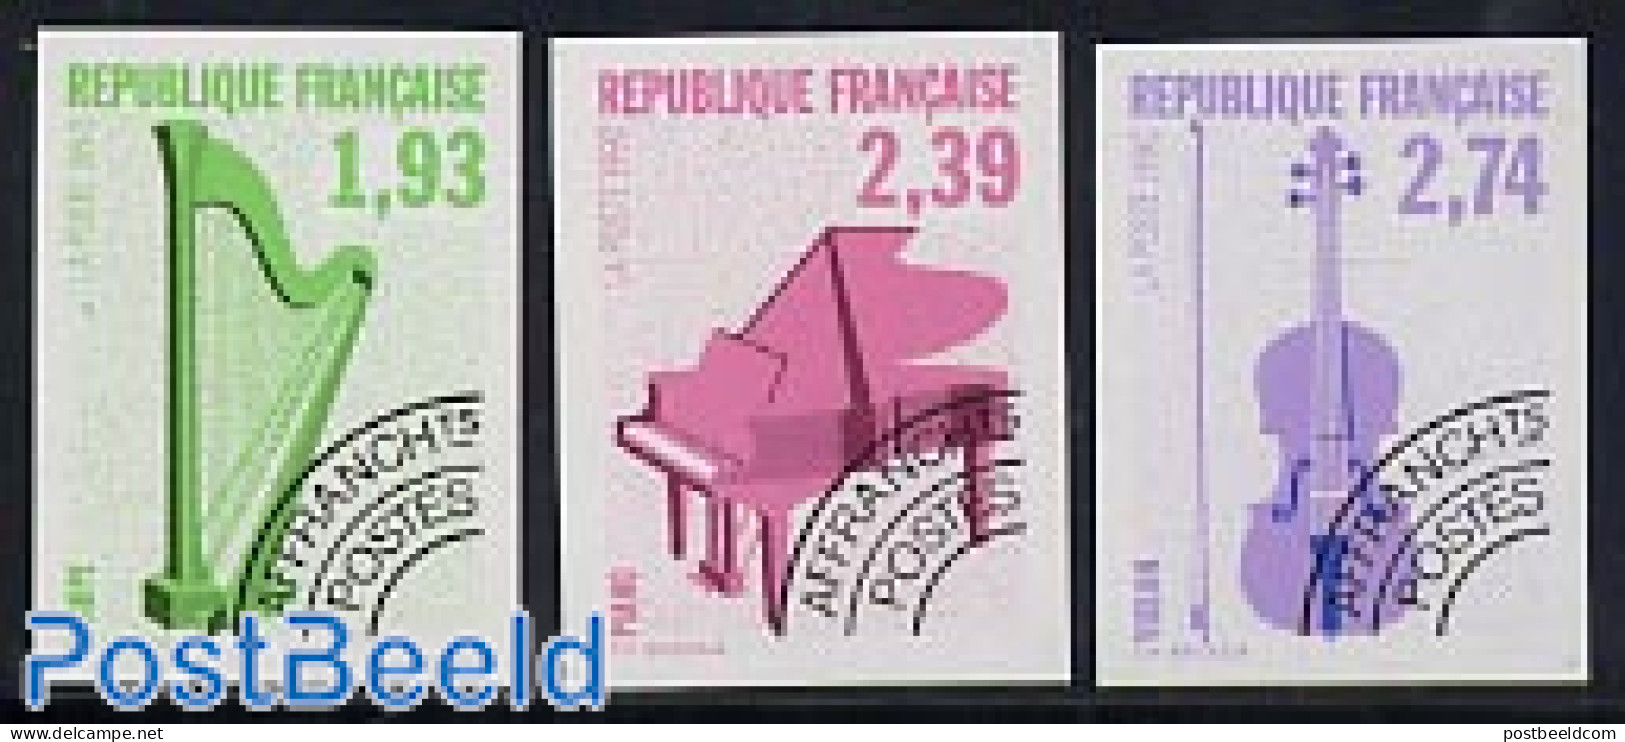 France 1990 Music Instruments 3v Imperforated, Mint NH, Performance Art - Music - Musical Instruments - Ungebraucht